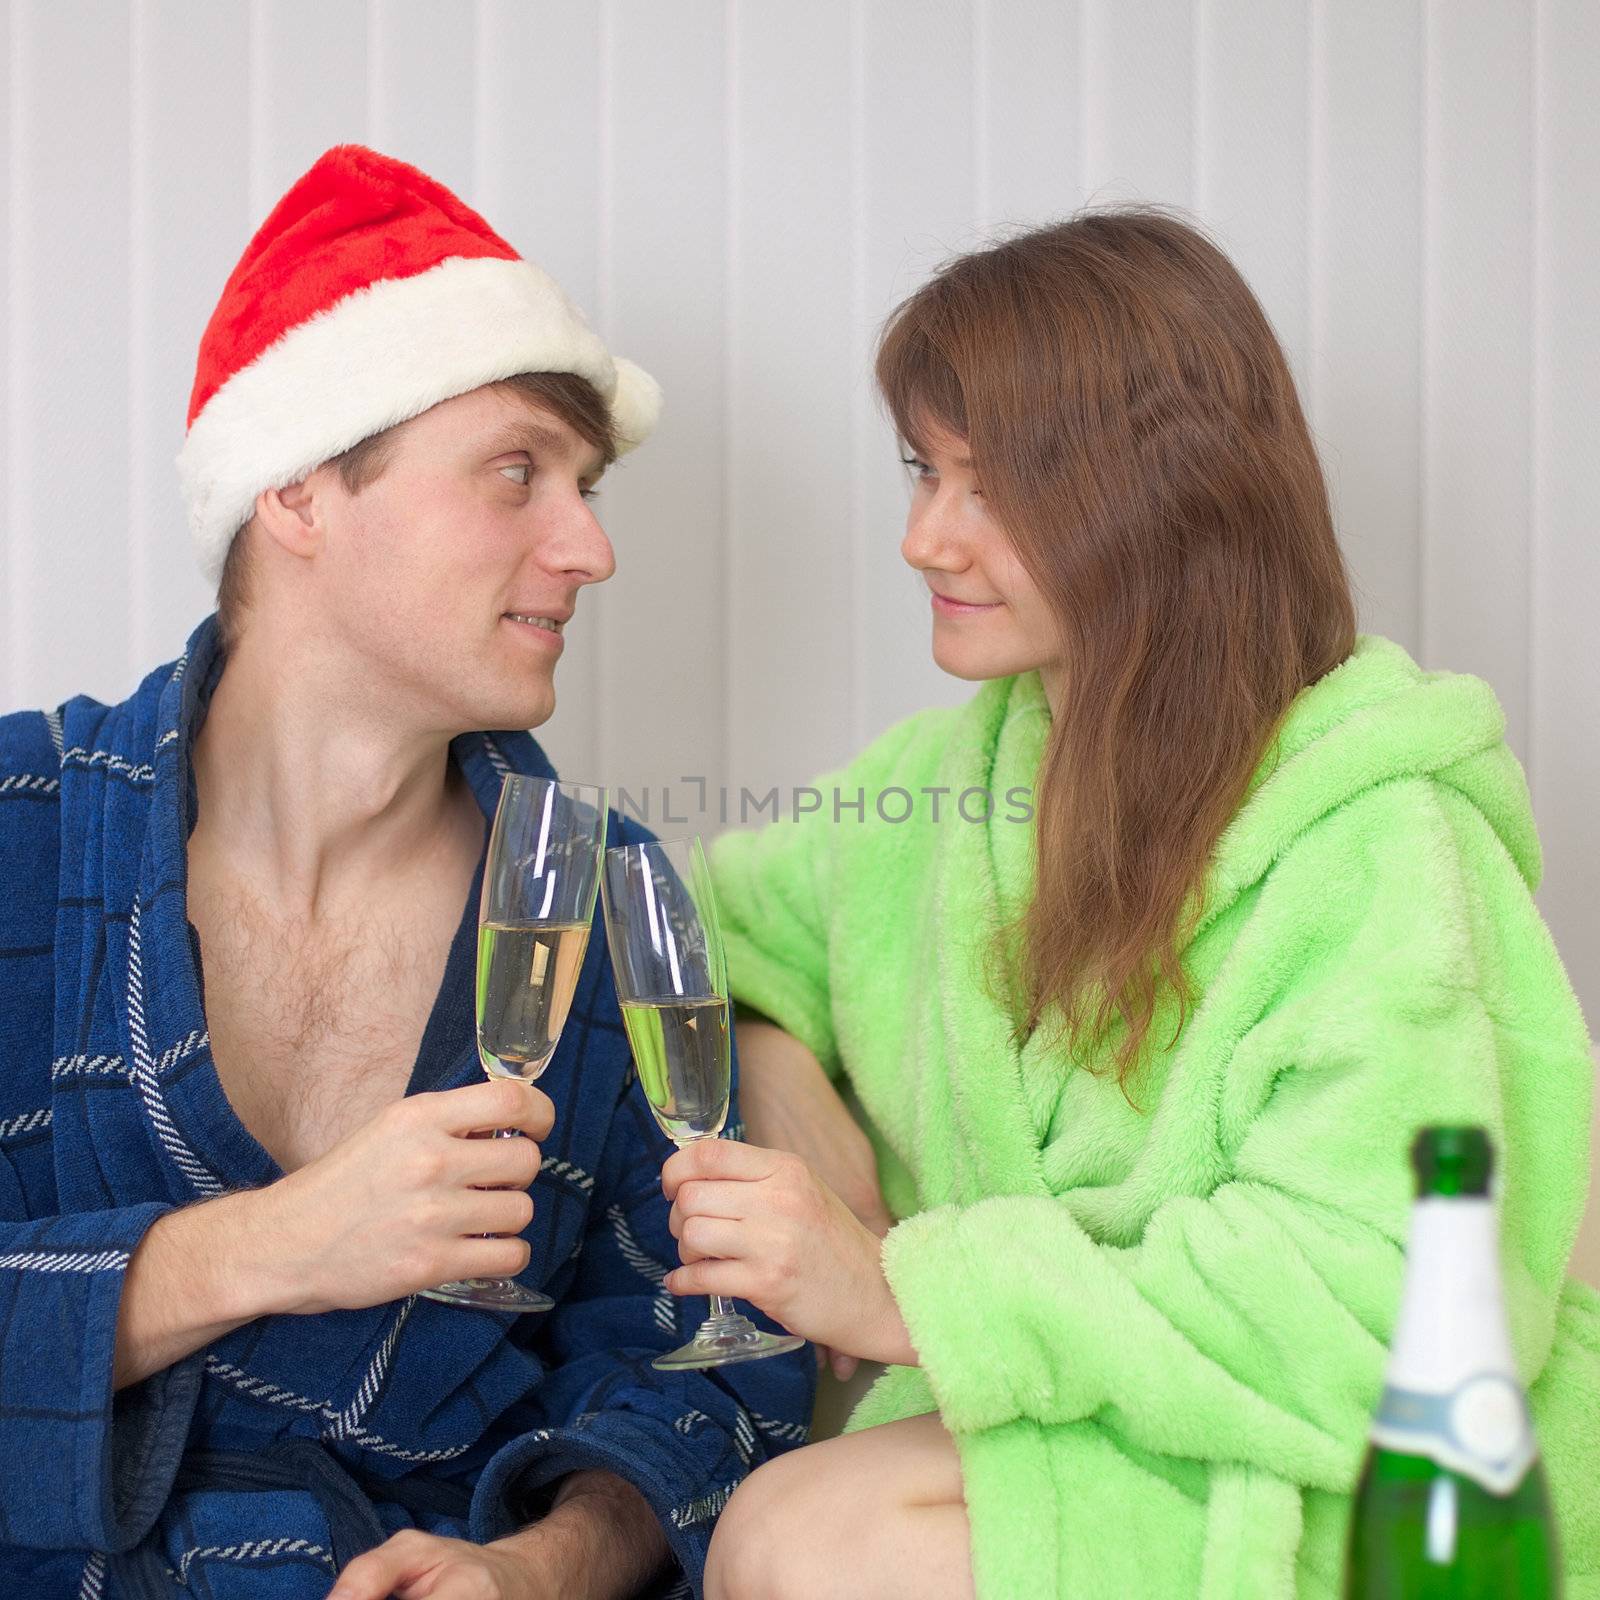 The young pair drinks champagne sitting on a sofa in dressing gowns